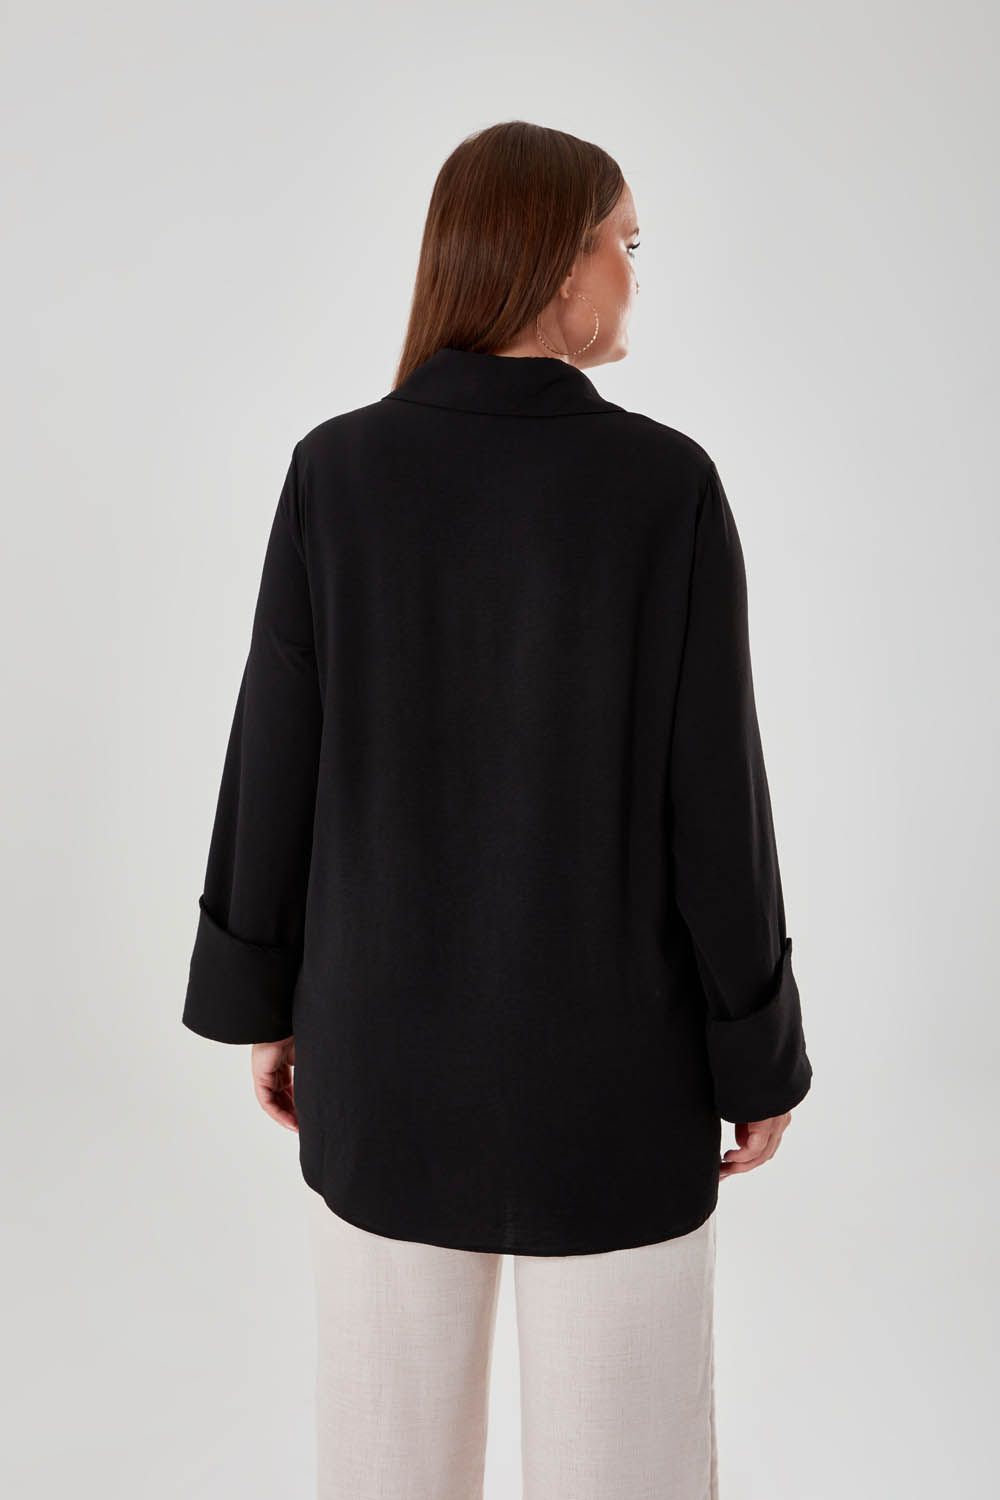 Gold Buttoned Pointed Collar Black Shirt Tunic